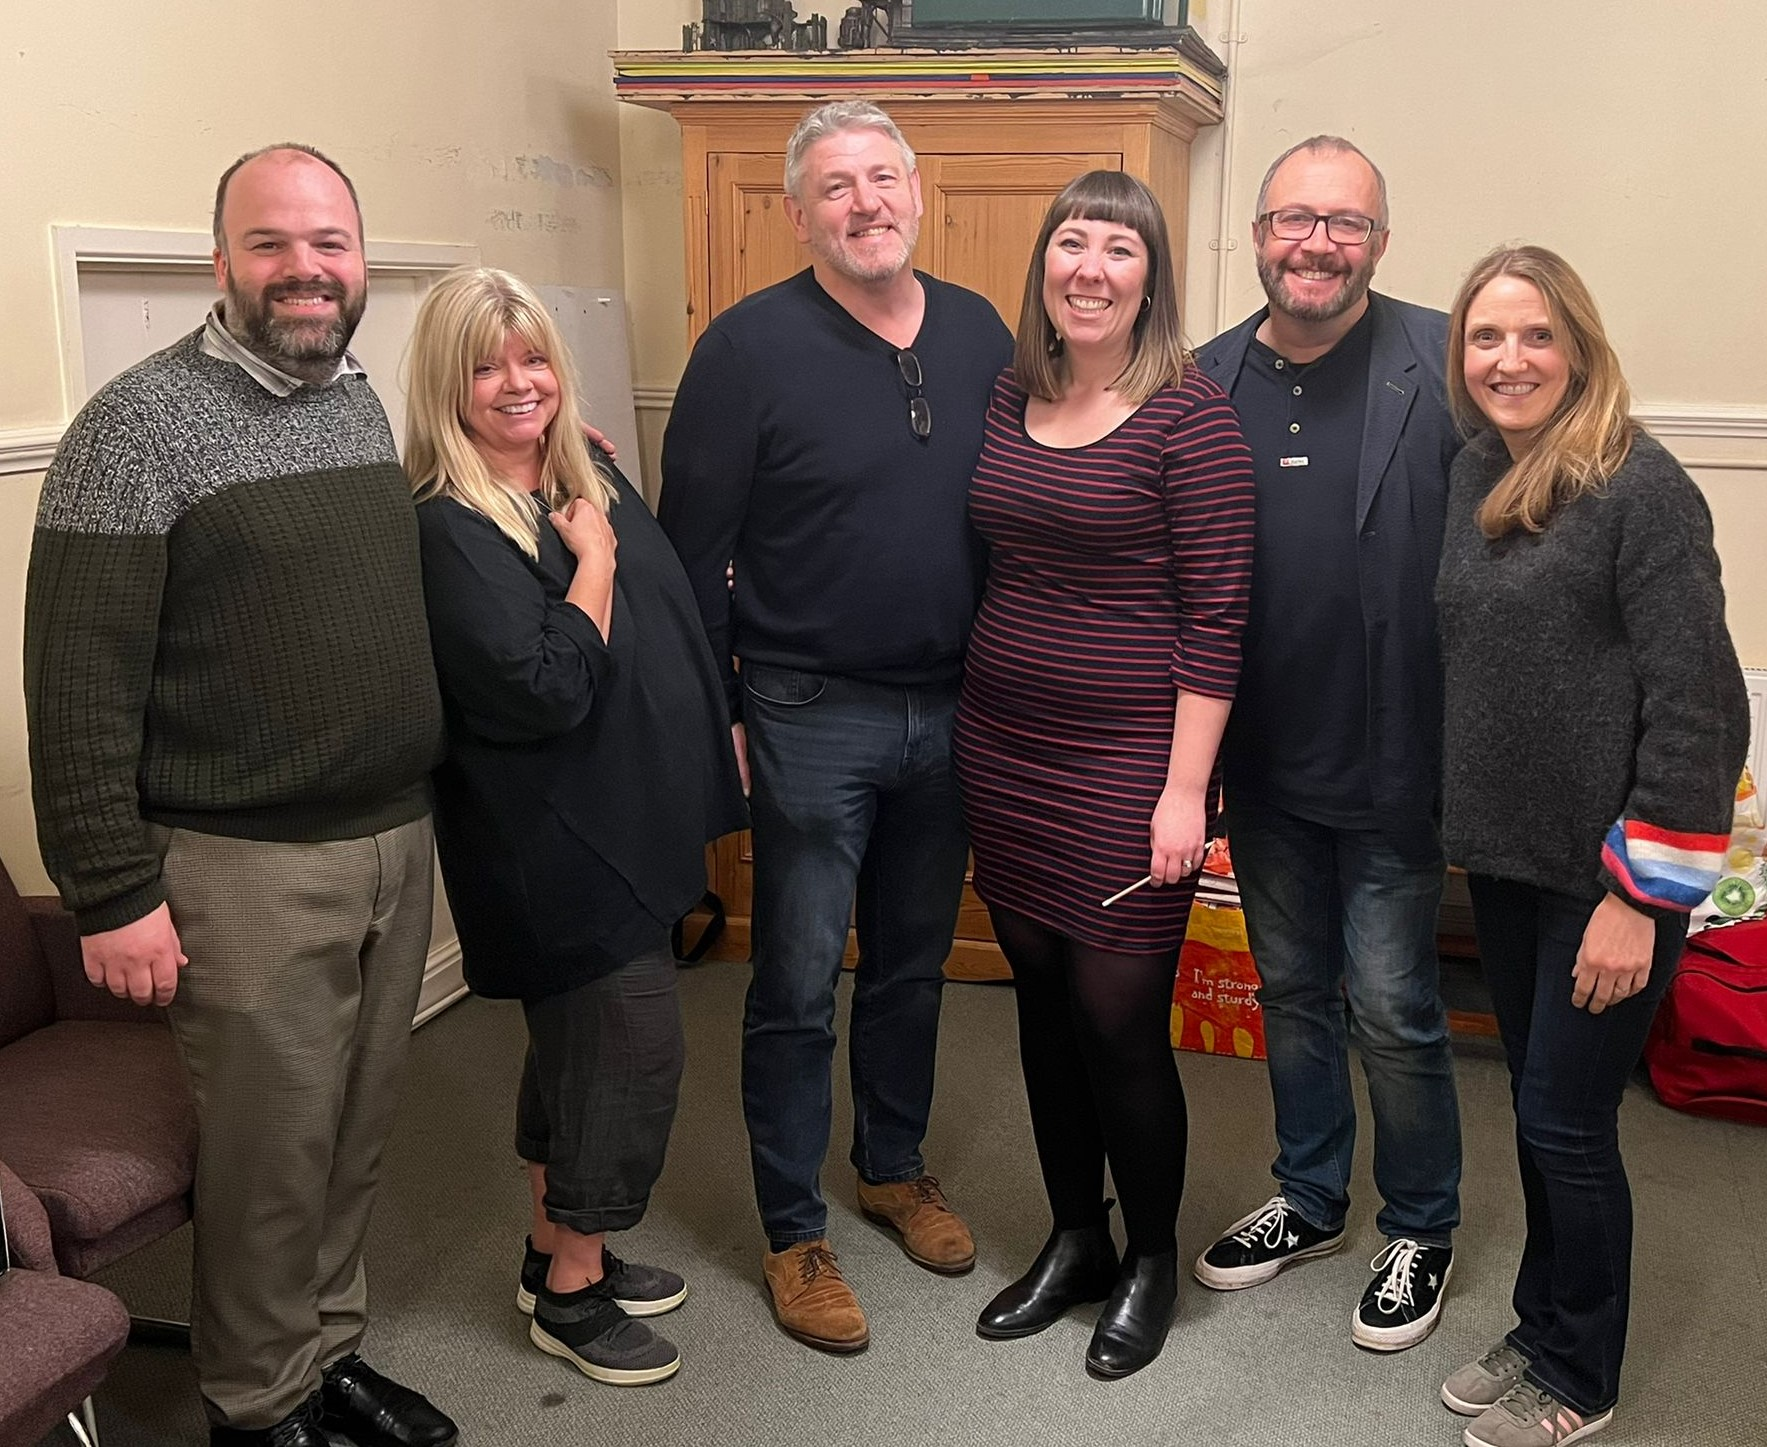 the P pod - Petersfield personalities show - 4 April 2022